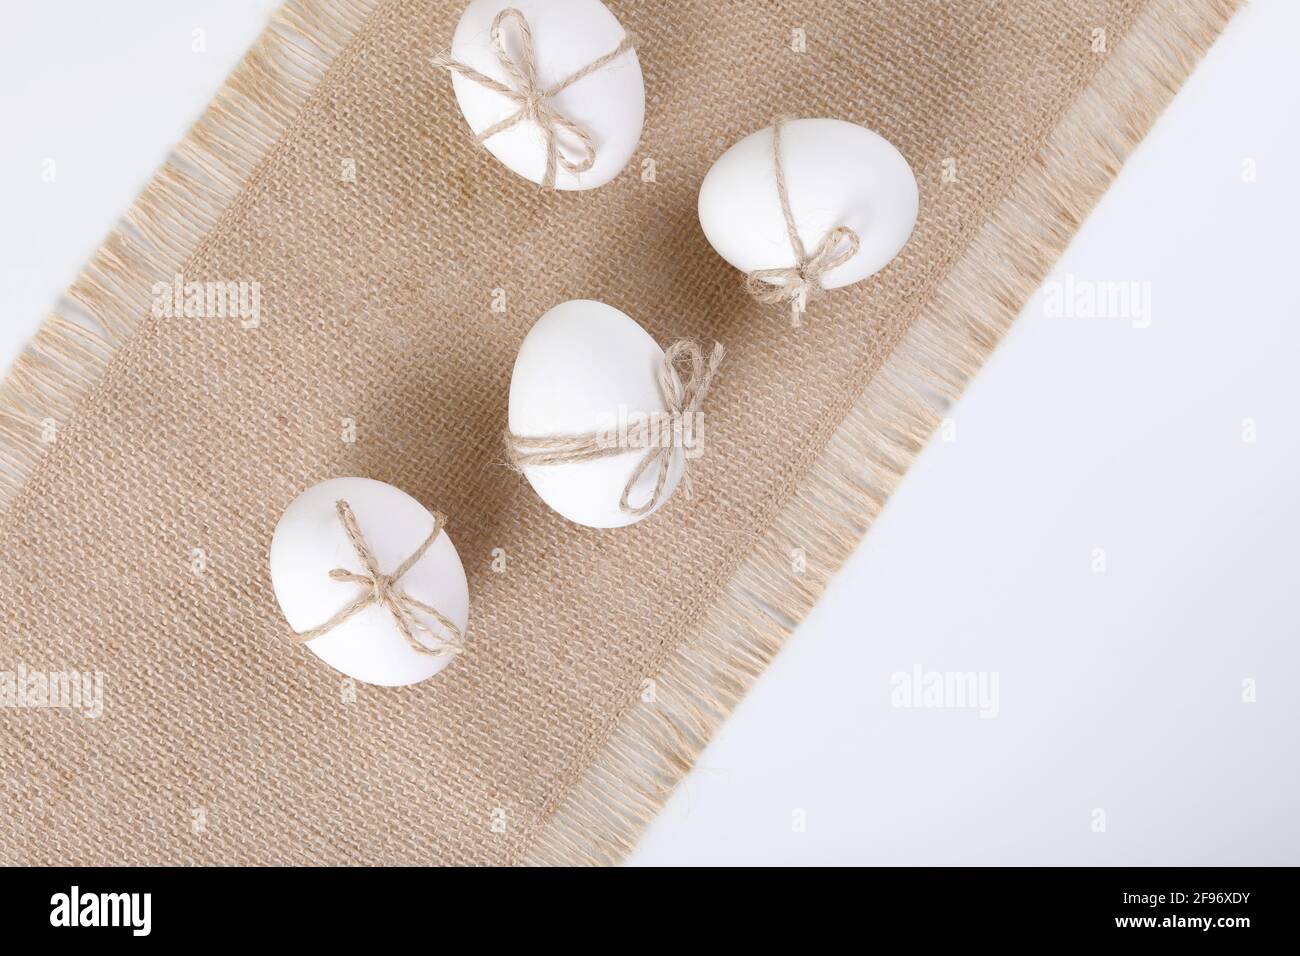 Happy Easter concept. White fresh chicken eggs on linen tablecloth. Simple minimalism. Copy space. Flat lay. Stock Photo